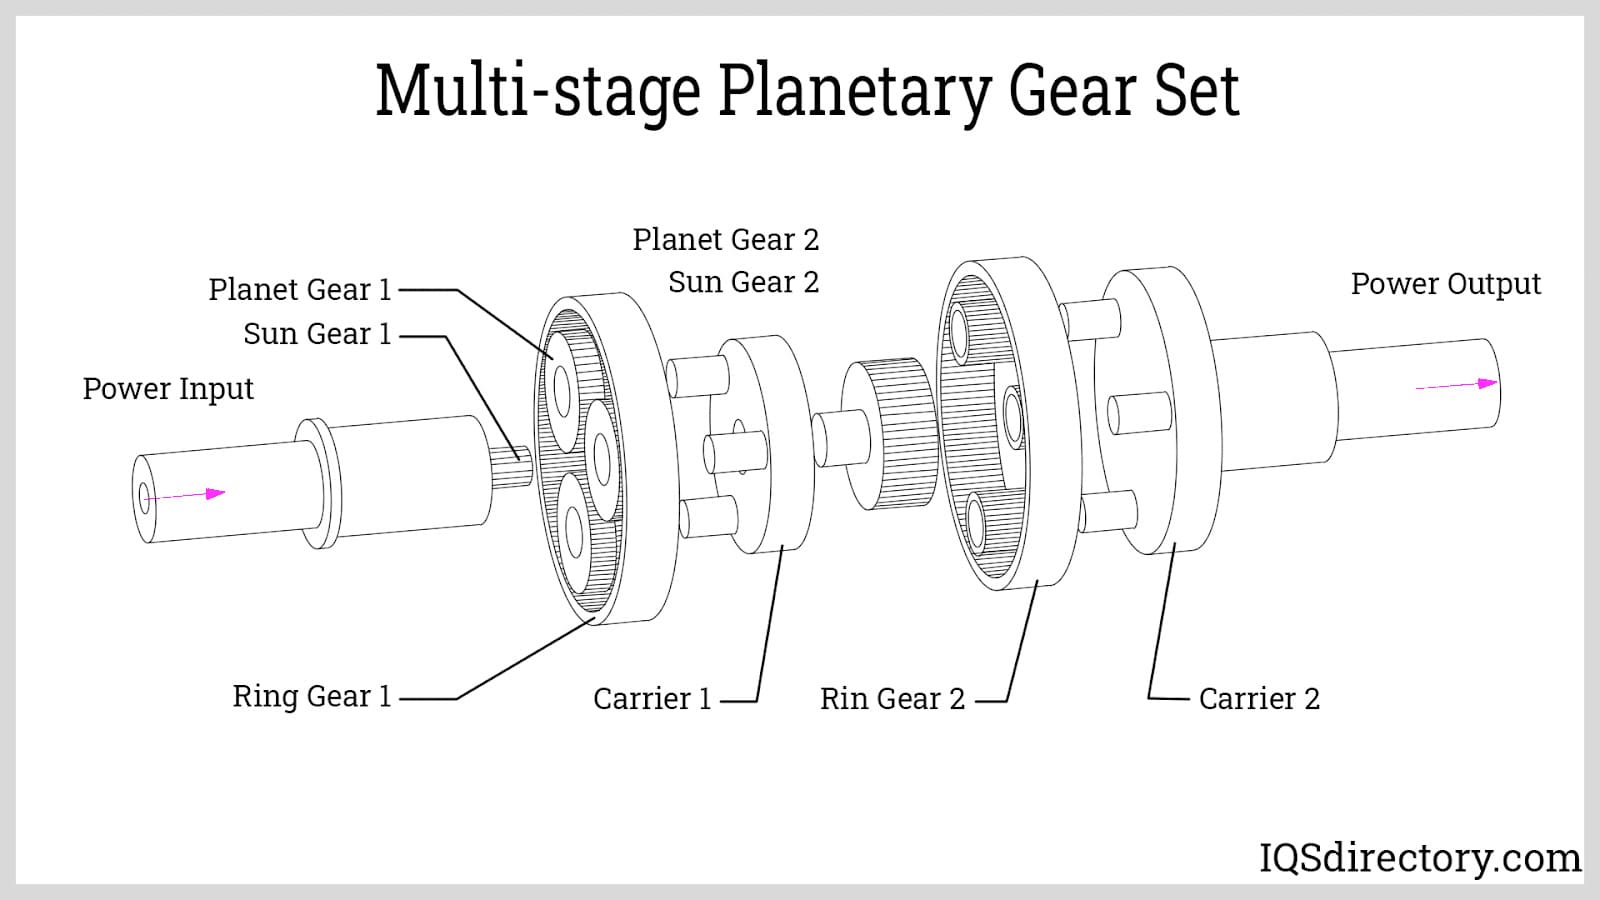 Multi-stage Planetary Gear Set